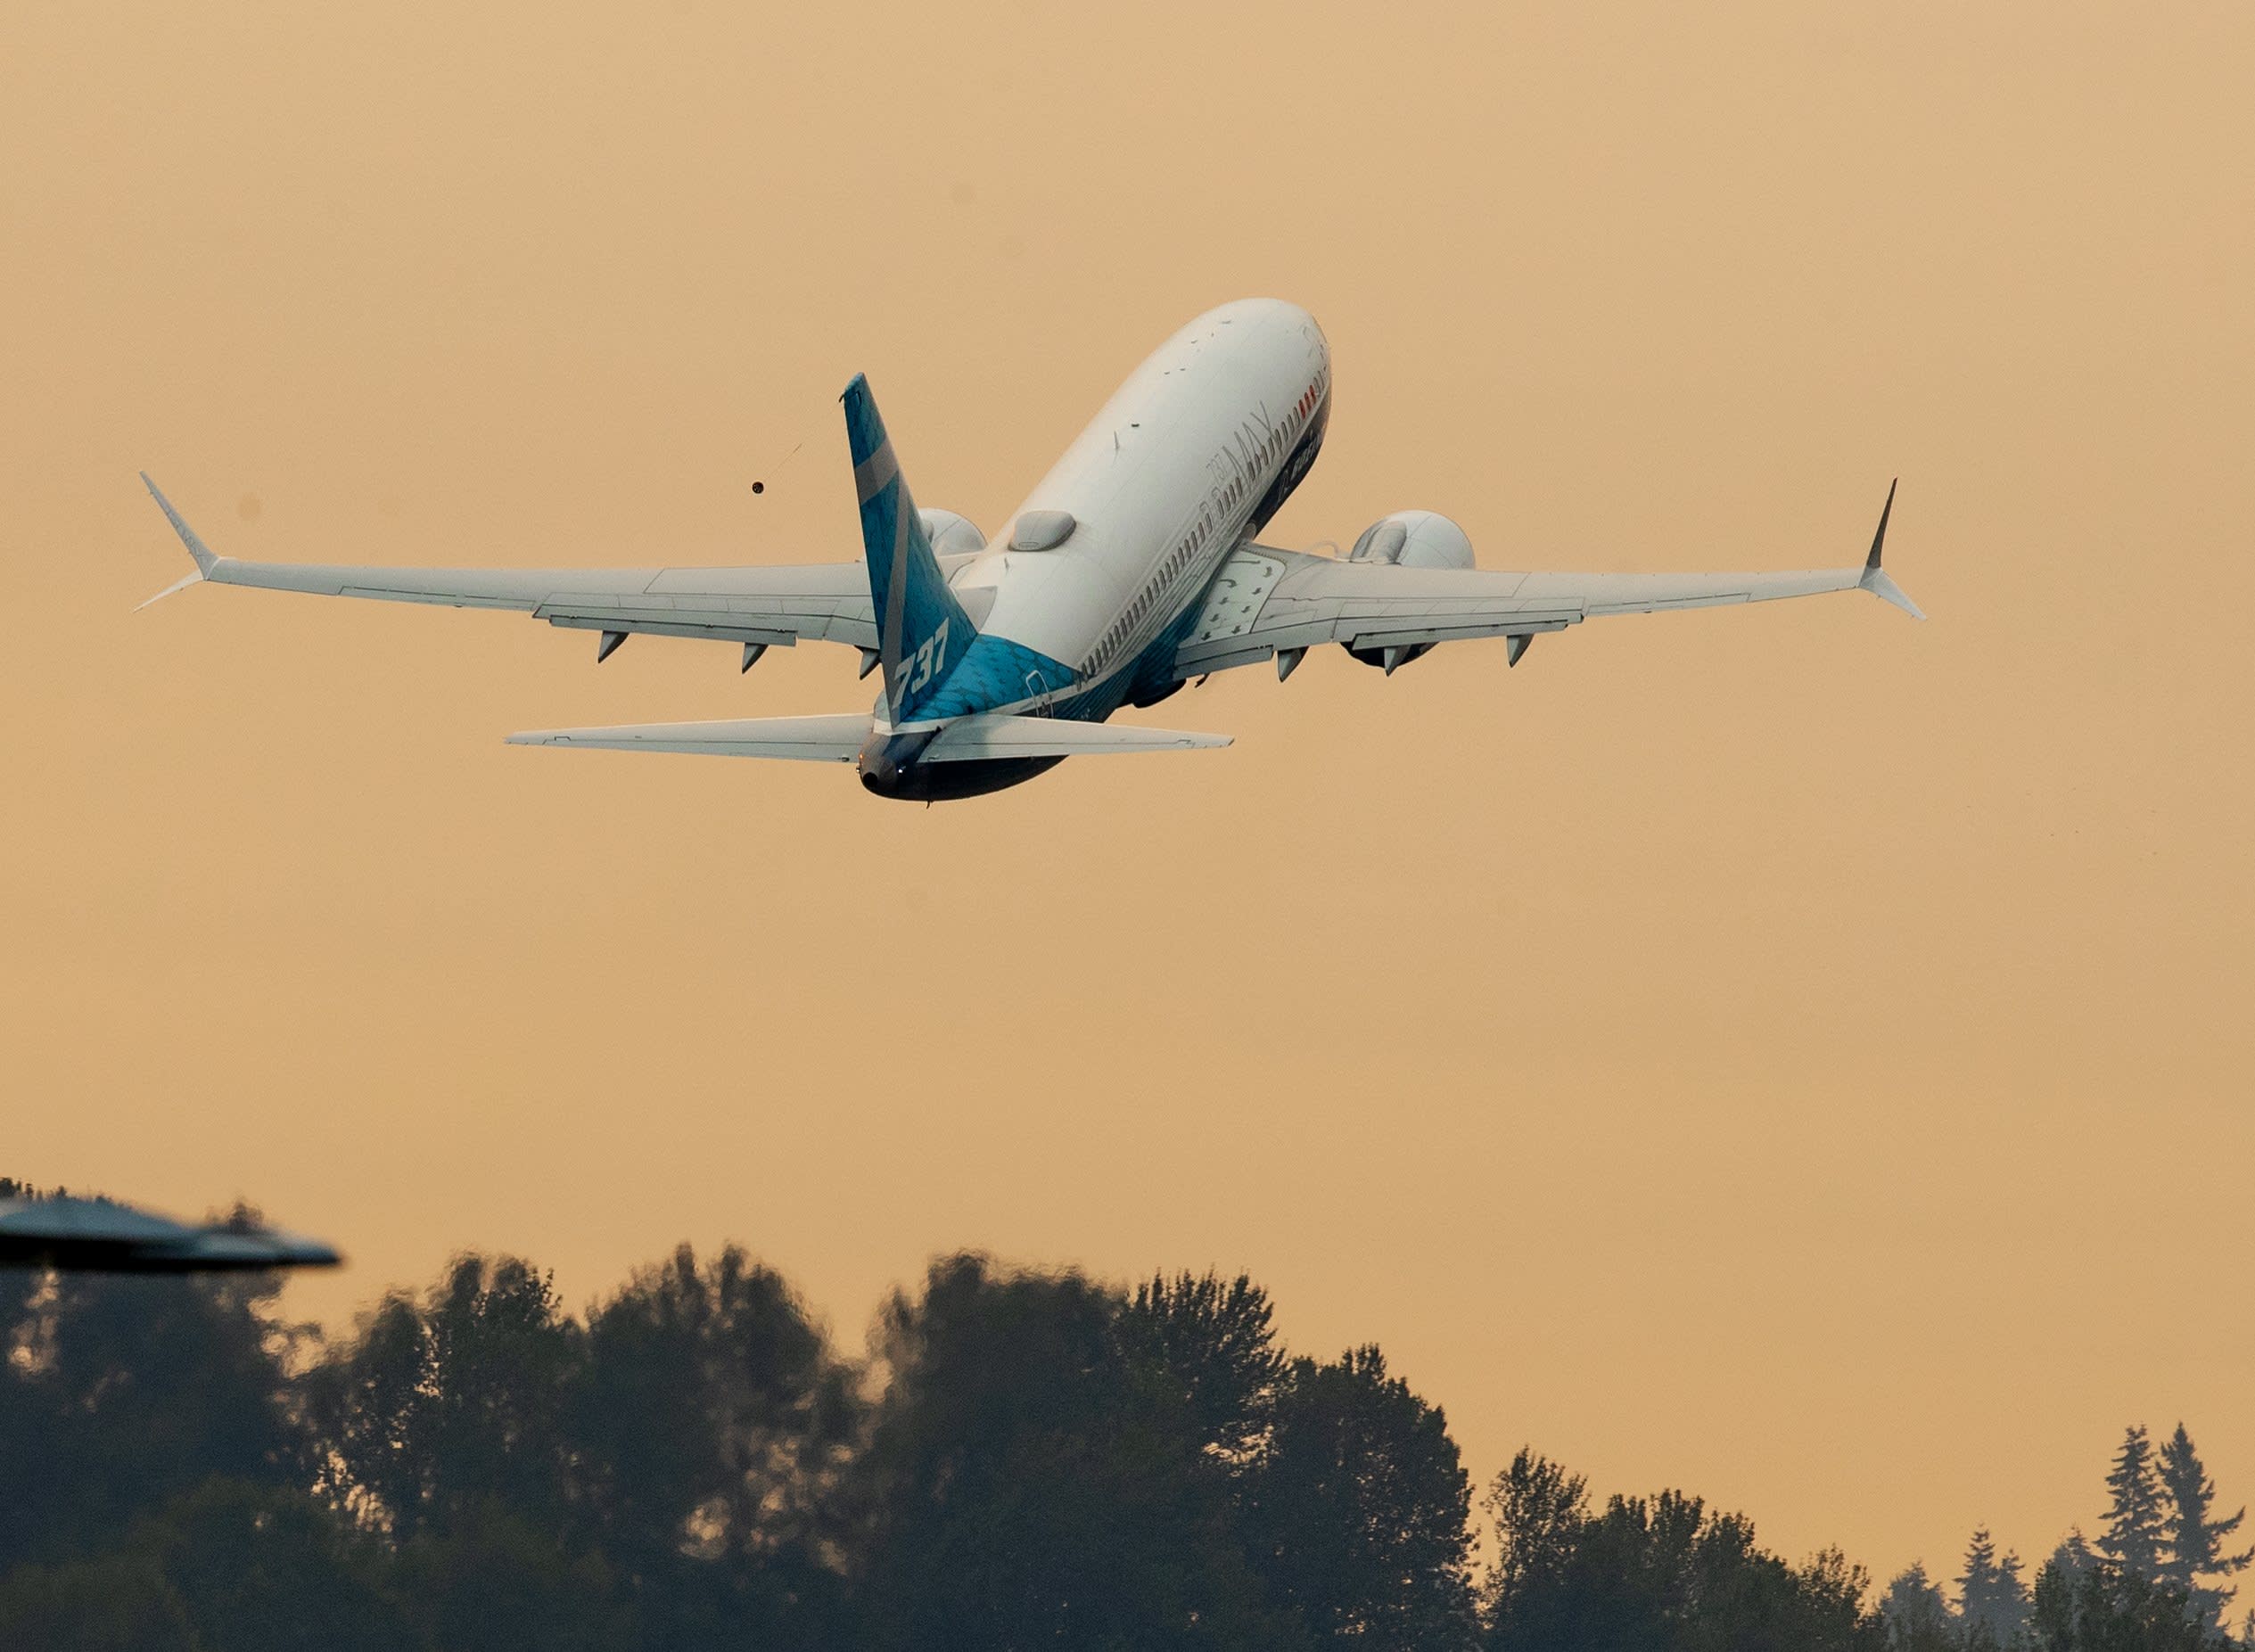 Boeing 737 Max cleared to fly once more after 20-month grounding